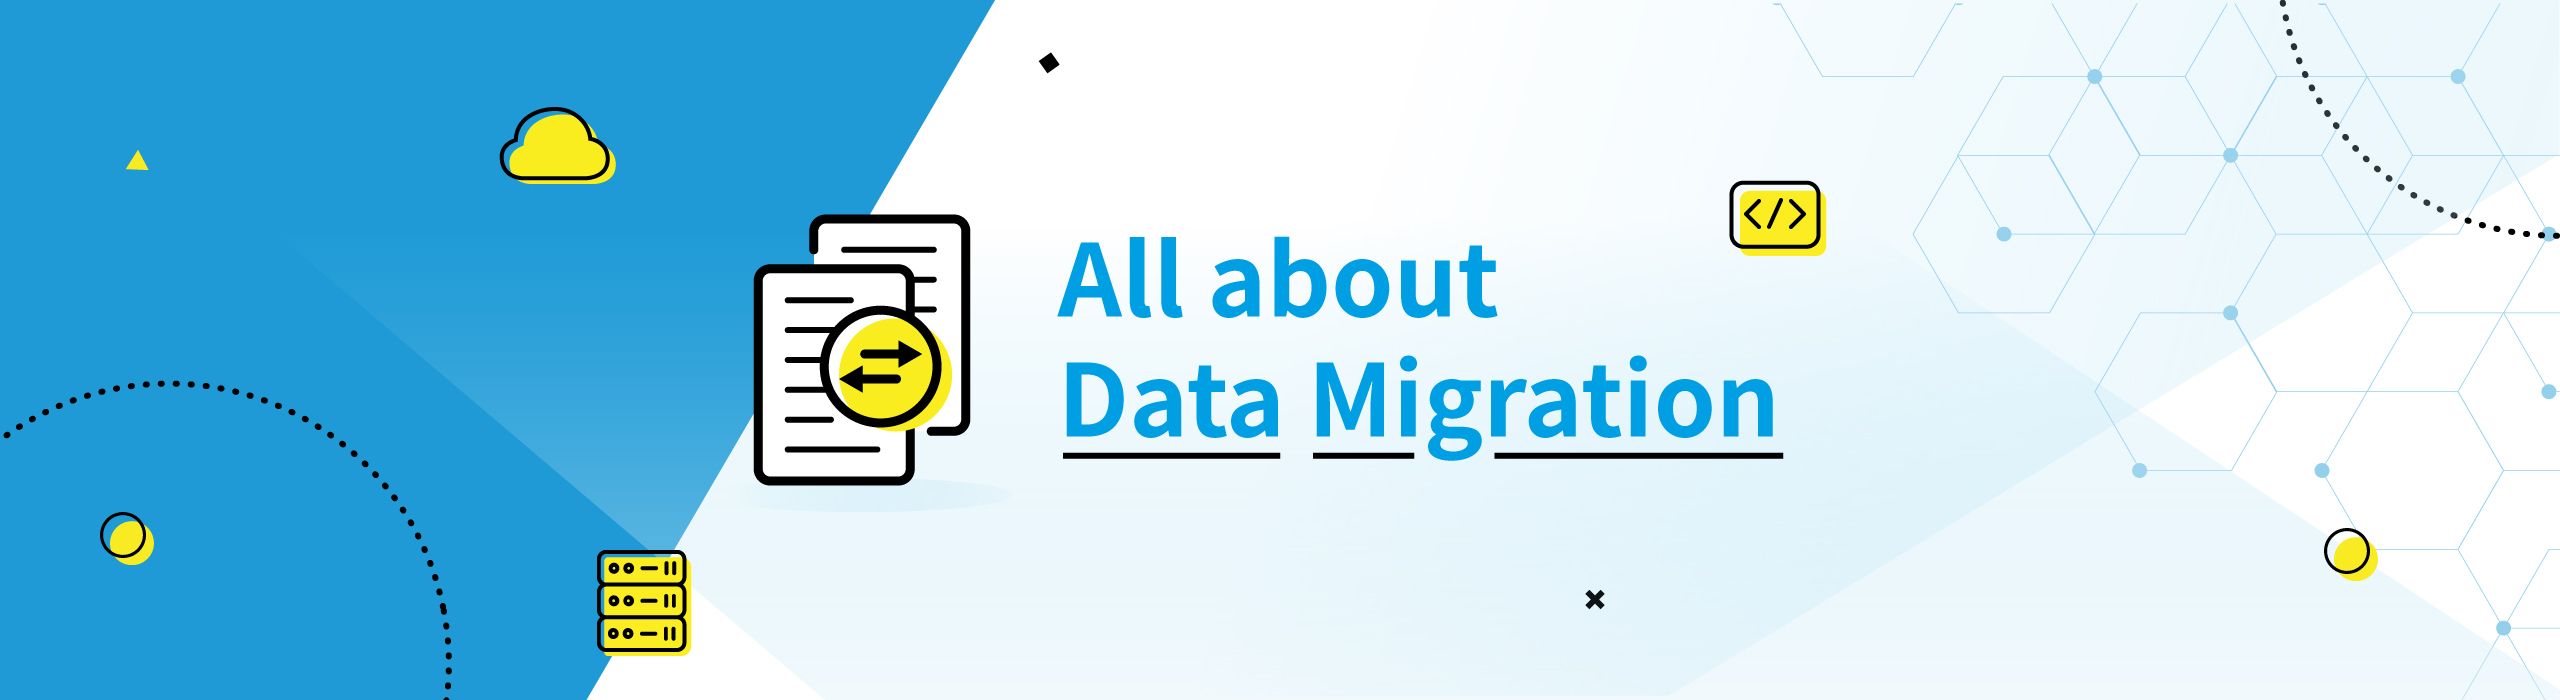 BLOG TITLE: All About Data Migration